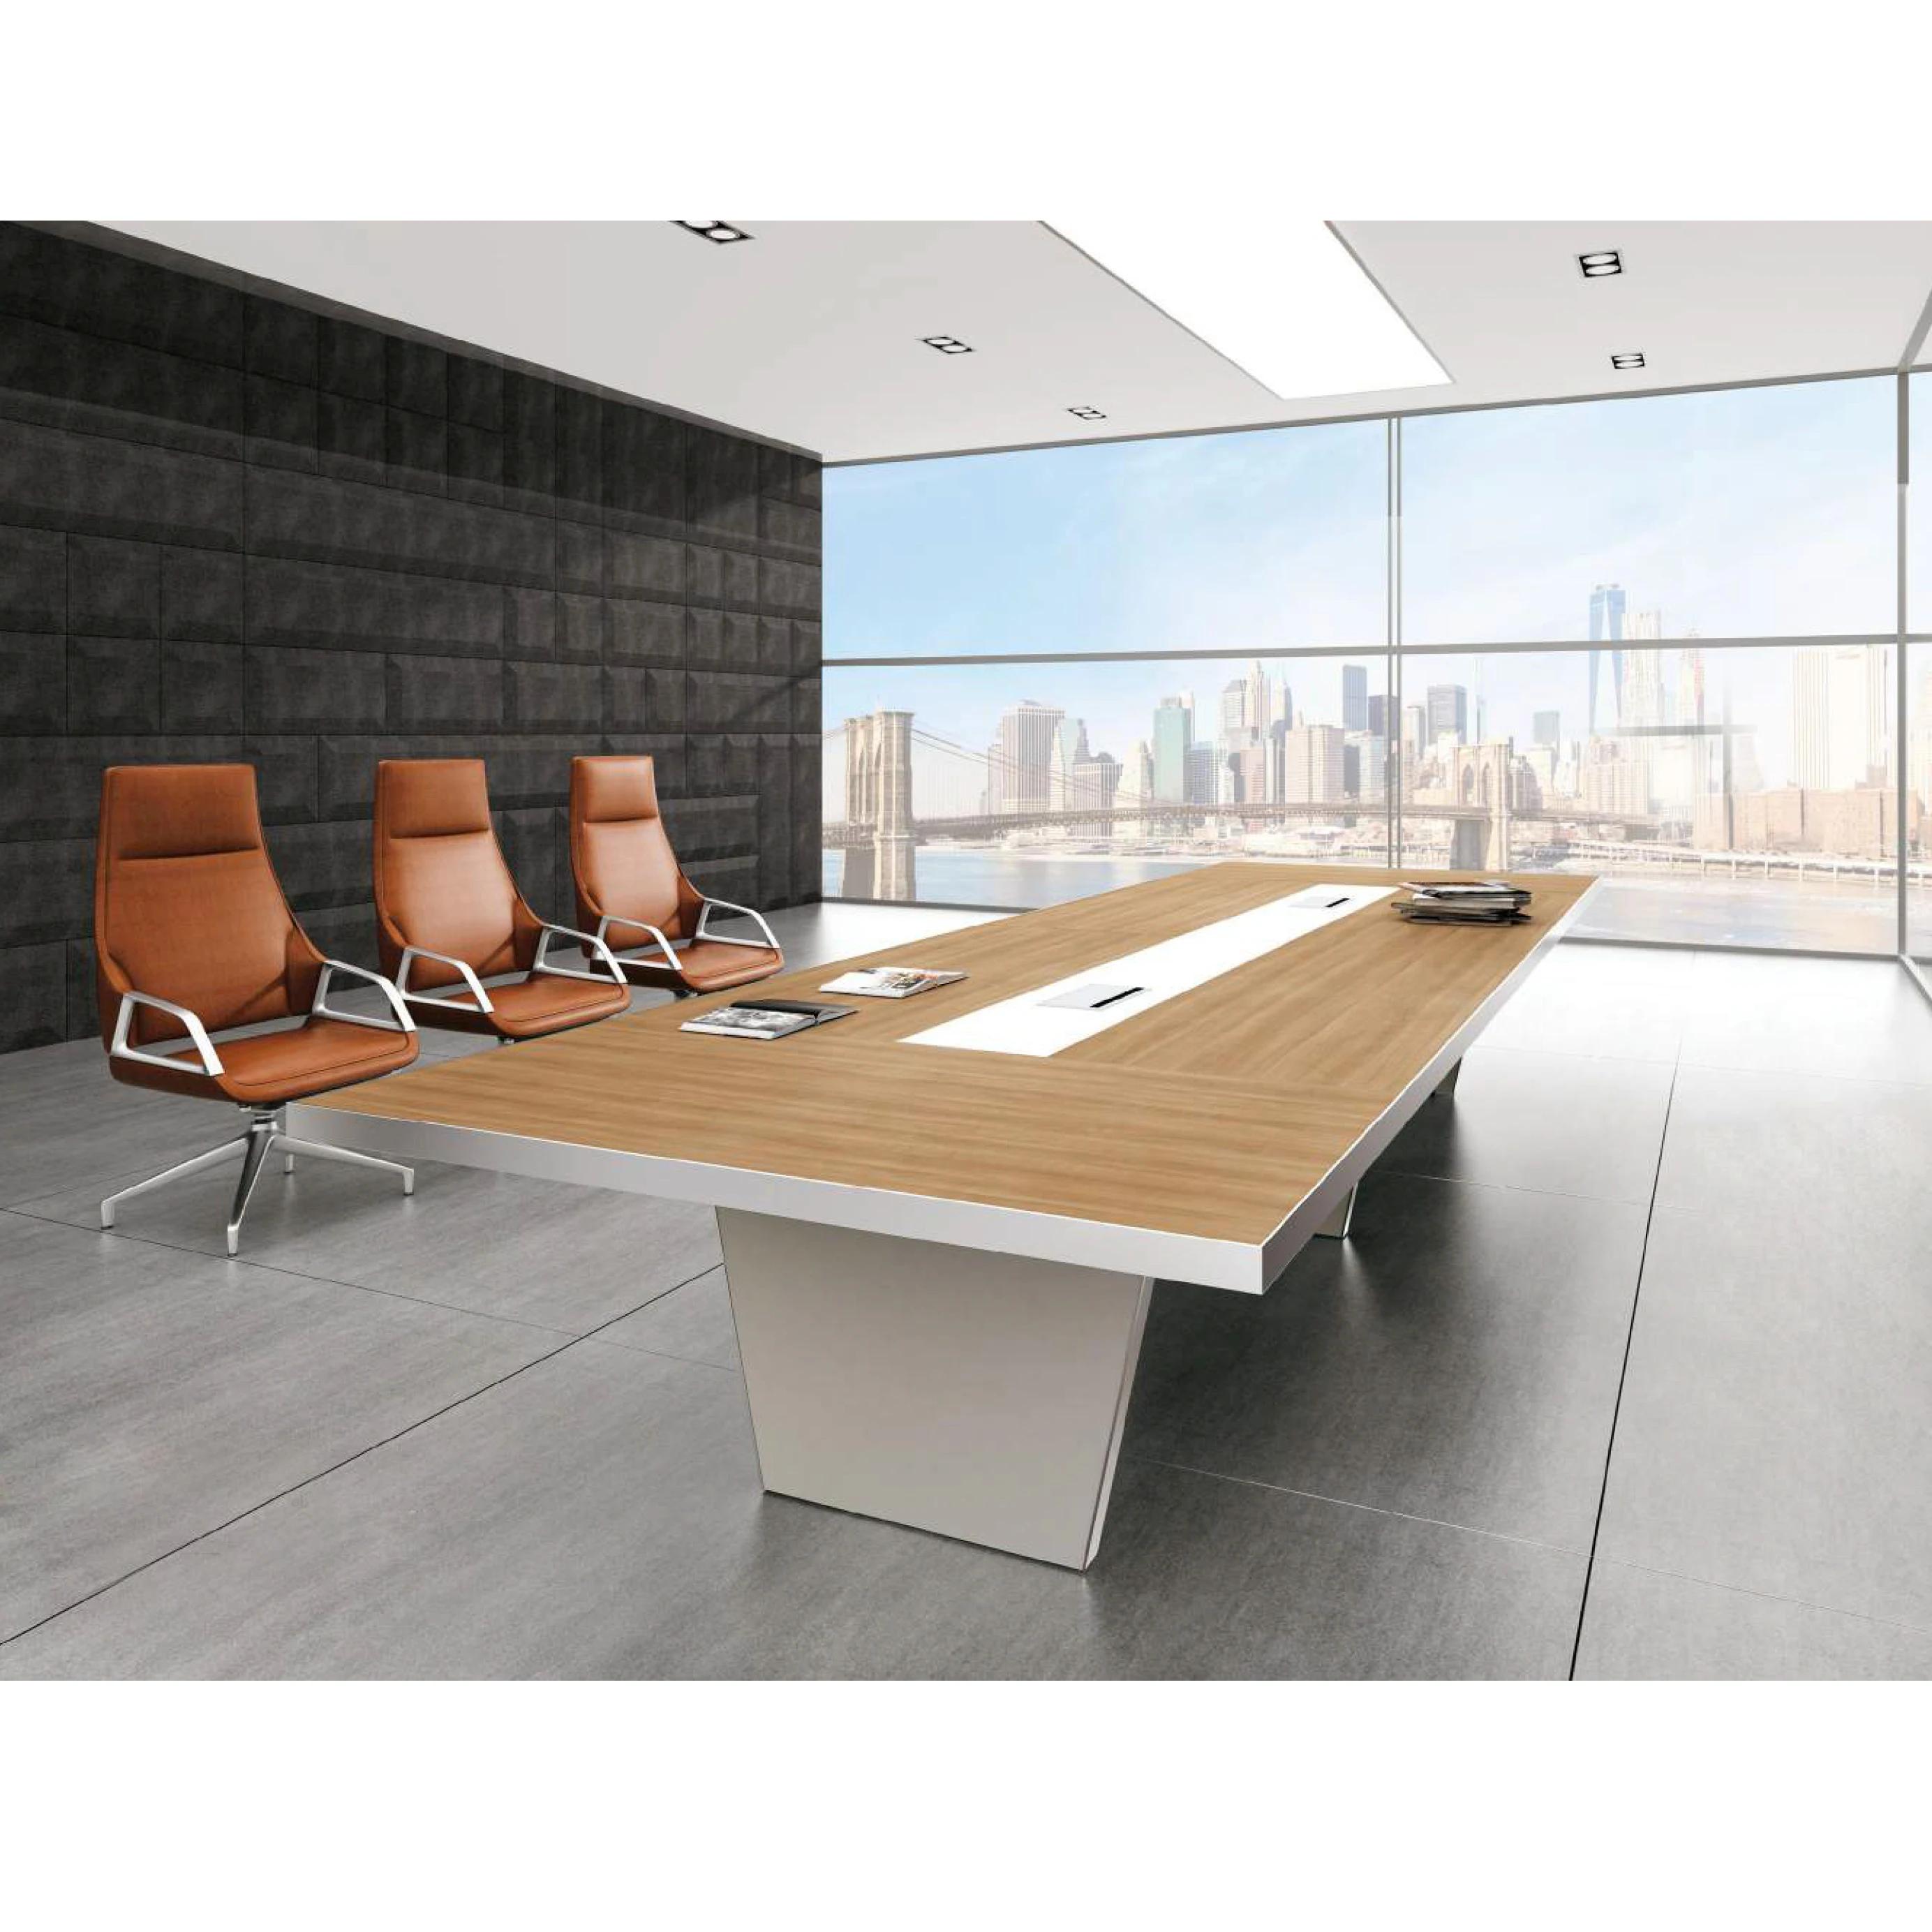 Small Rectangular Conference Room Table Office Furniture Type Melamine Meeting Table